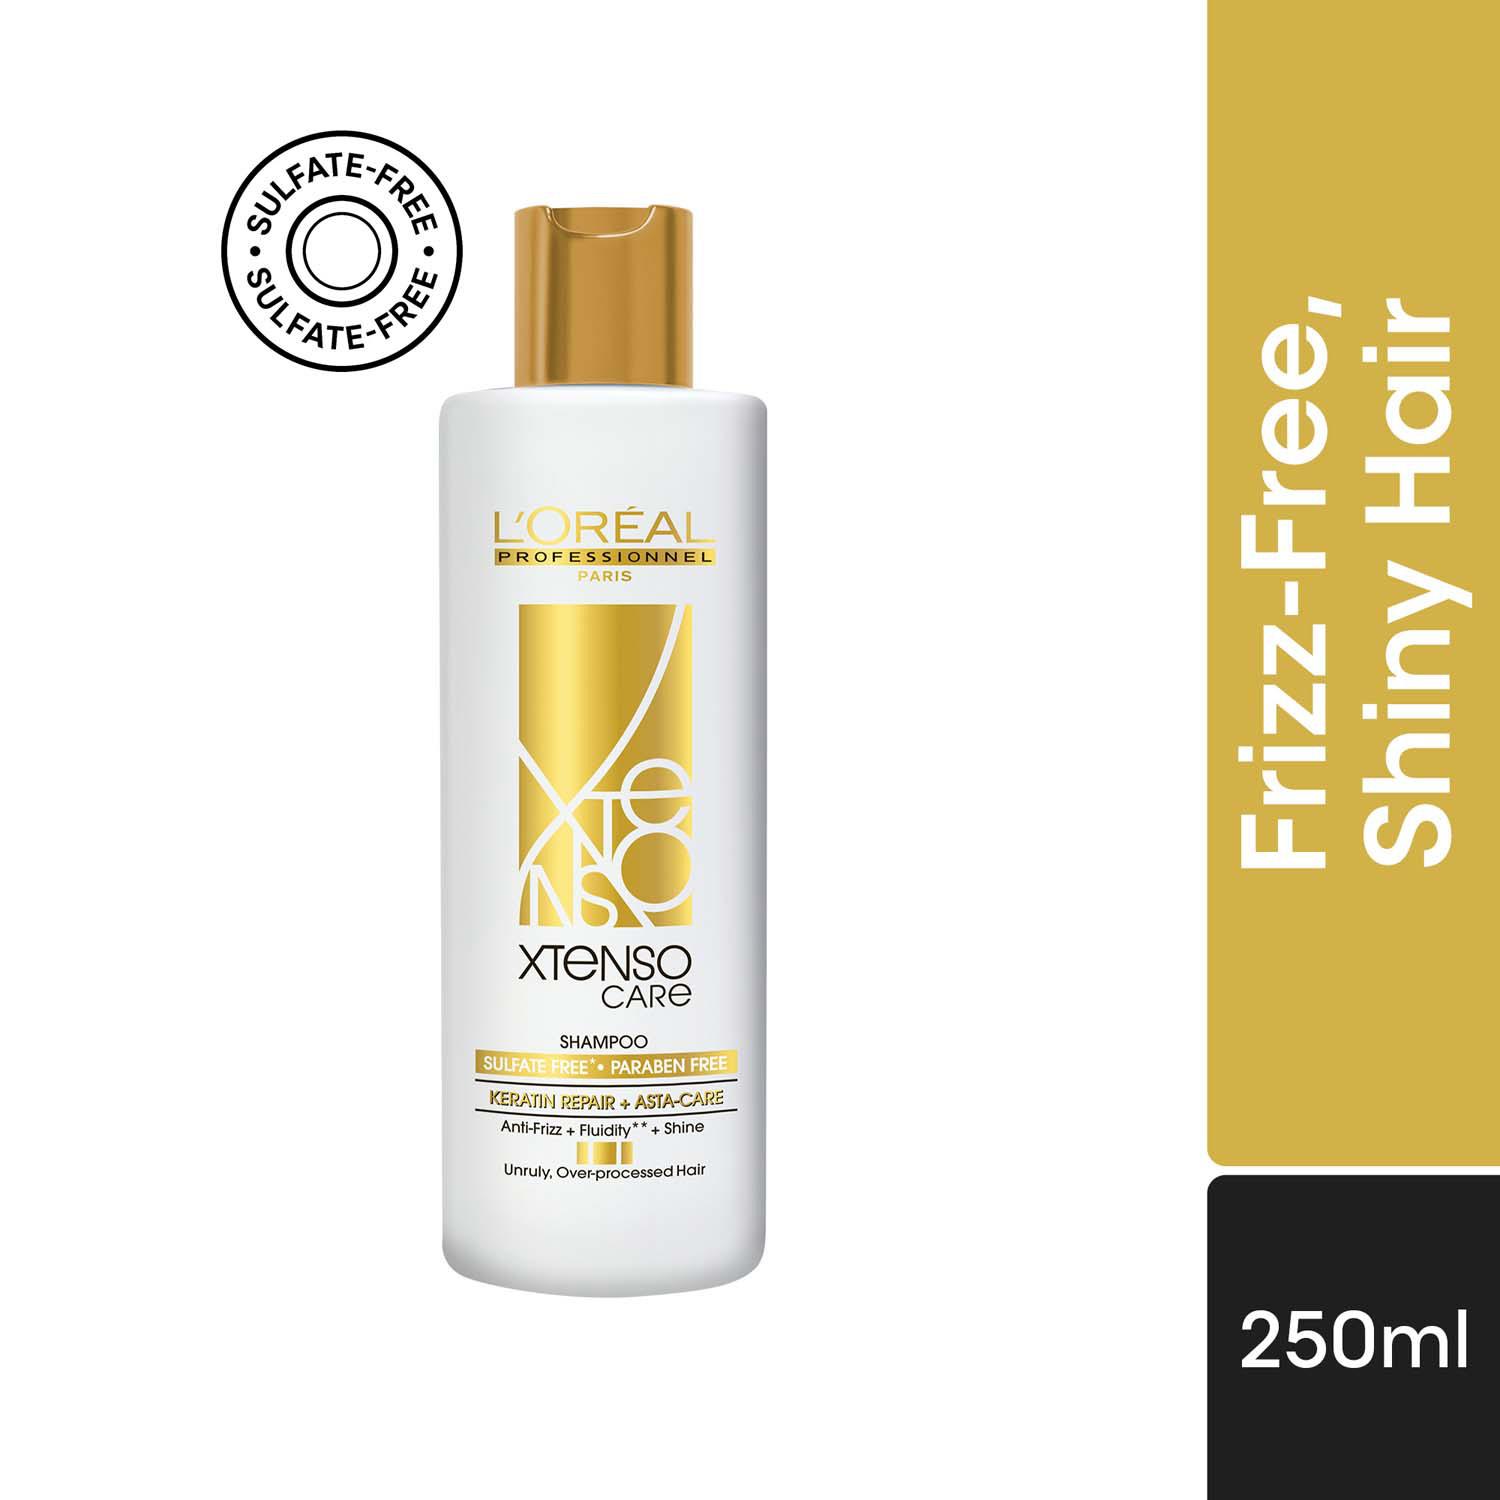 L'Oreal Professionnel | L'Oreal Professionnel Xtenso Care Sulfate-free Shampoo for Frizz-Free Shiny & Manageable Hair (250 ml)